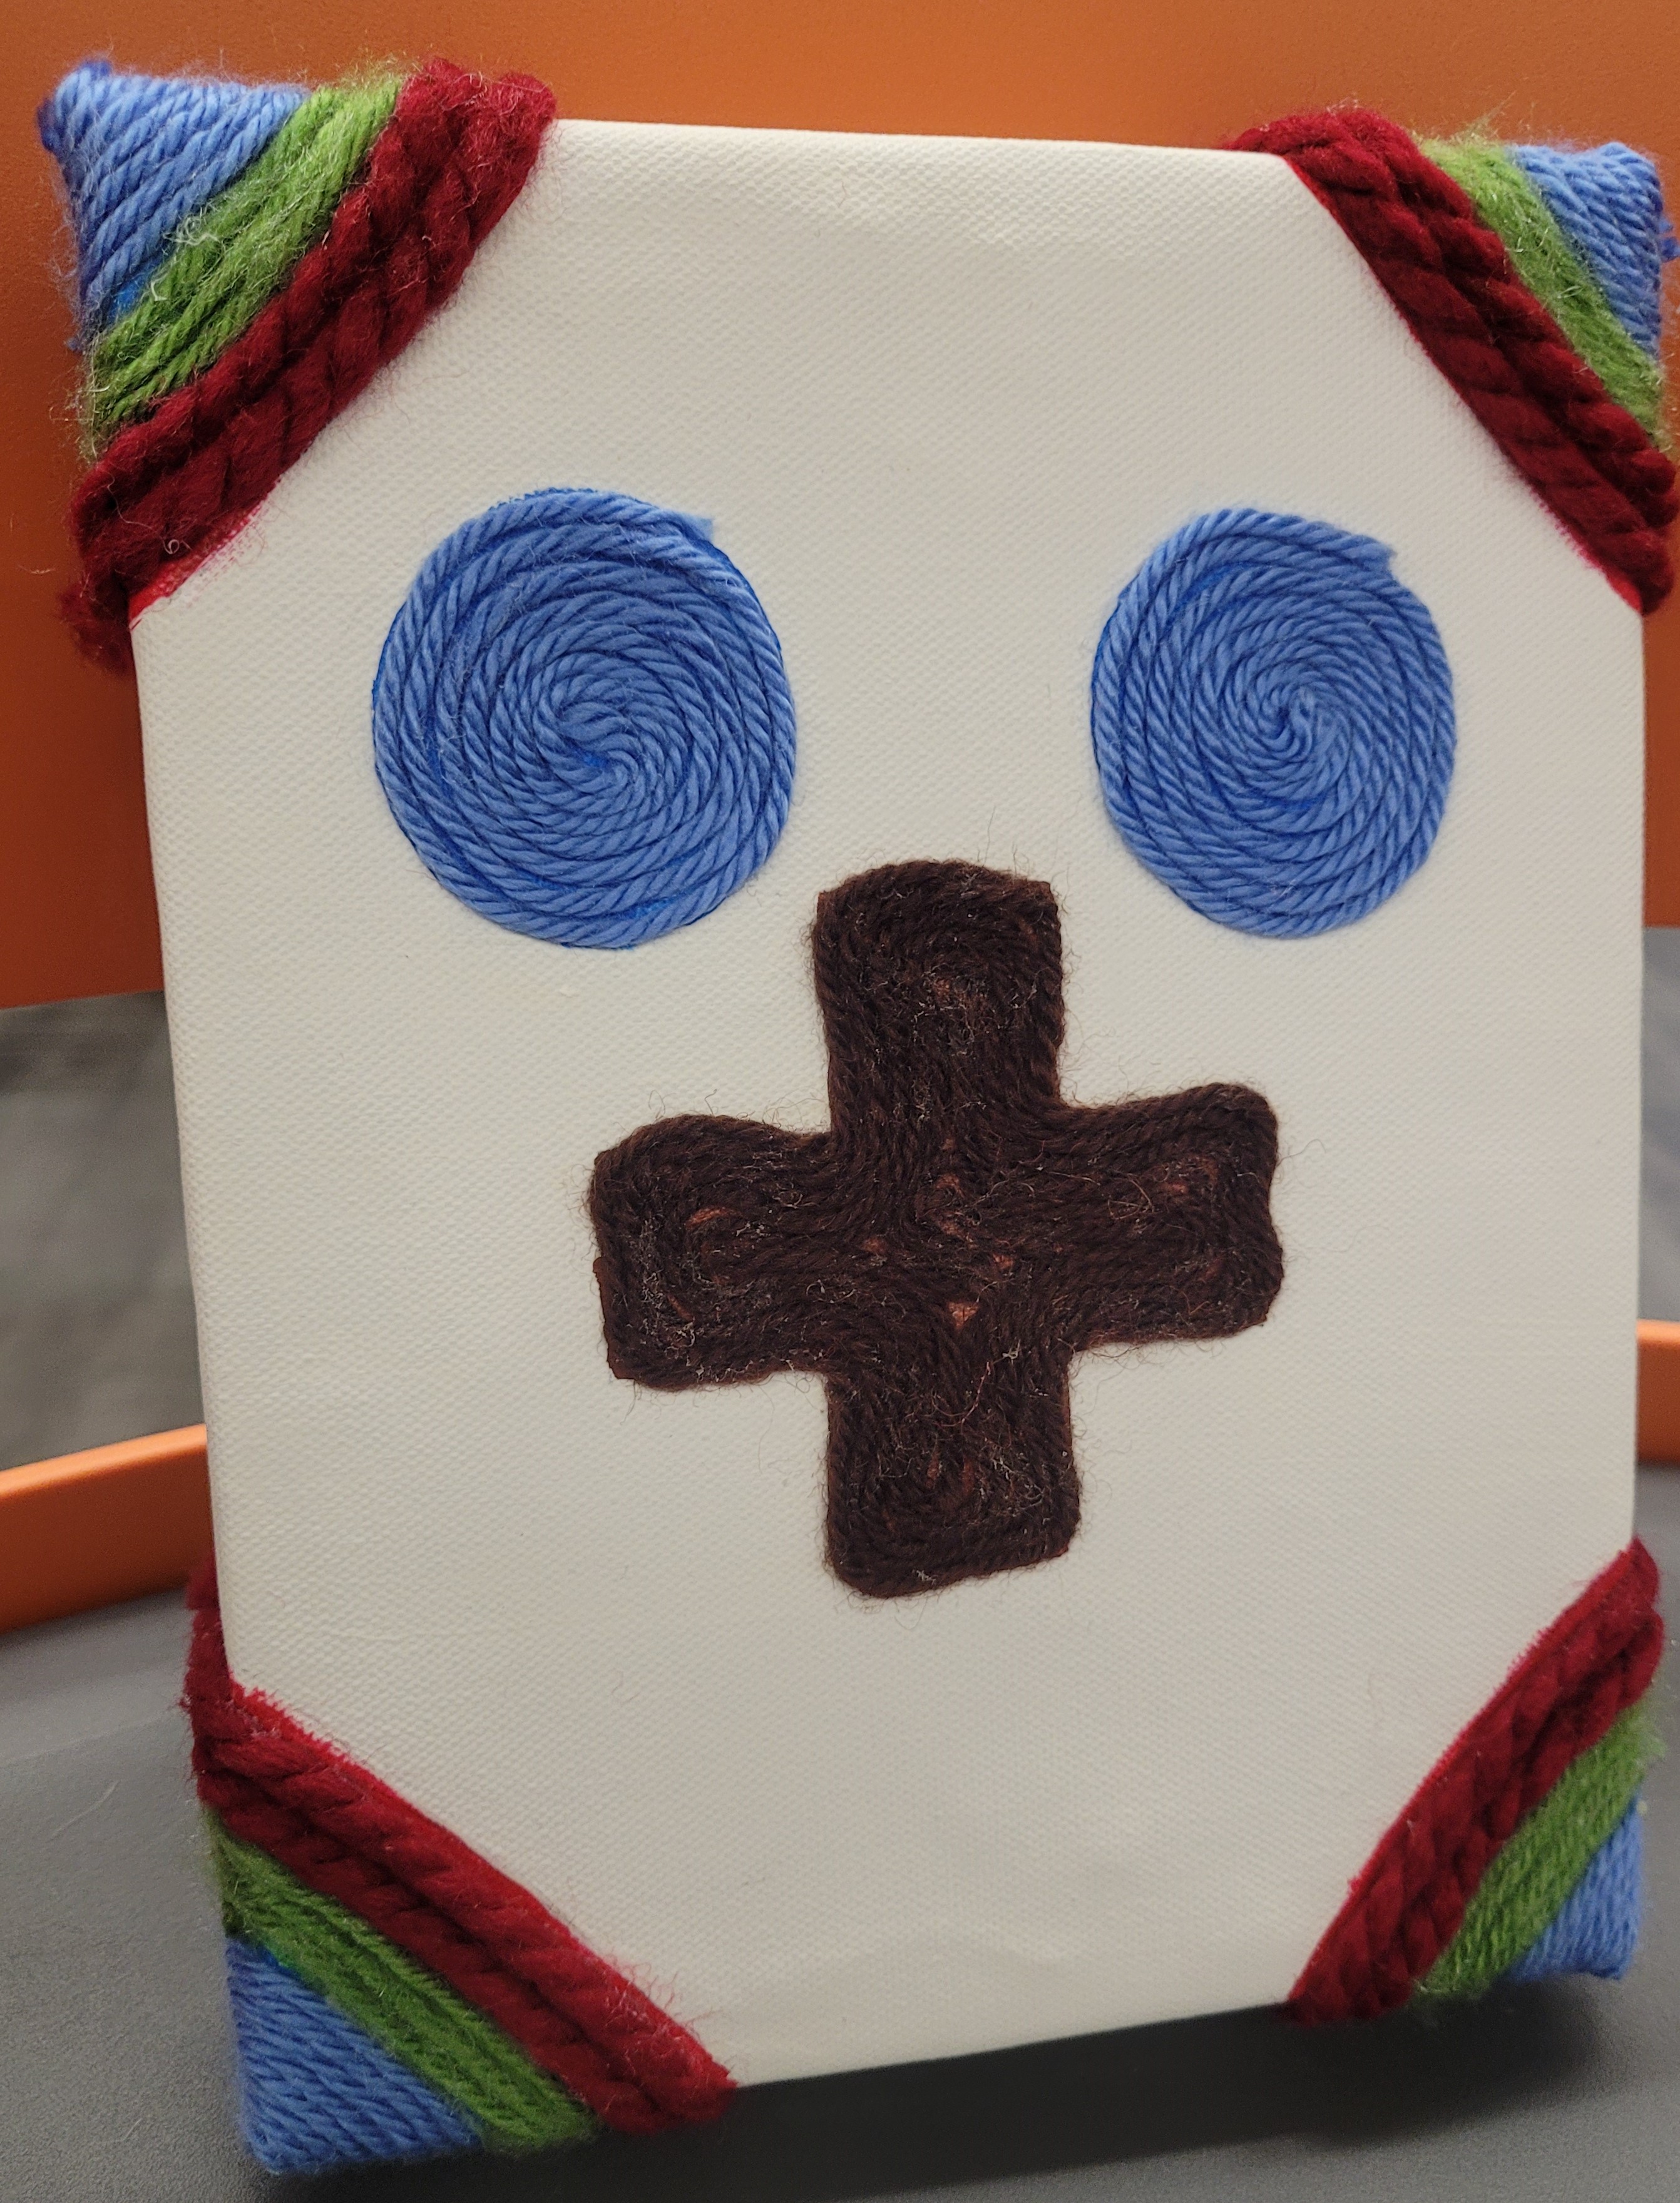 white canvas with green, red and blue yarn corners.  Two blue yarn circles on the top center and a brown yarn plus sign in the middle.